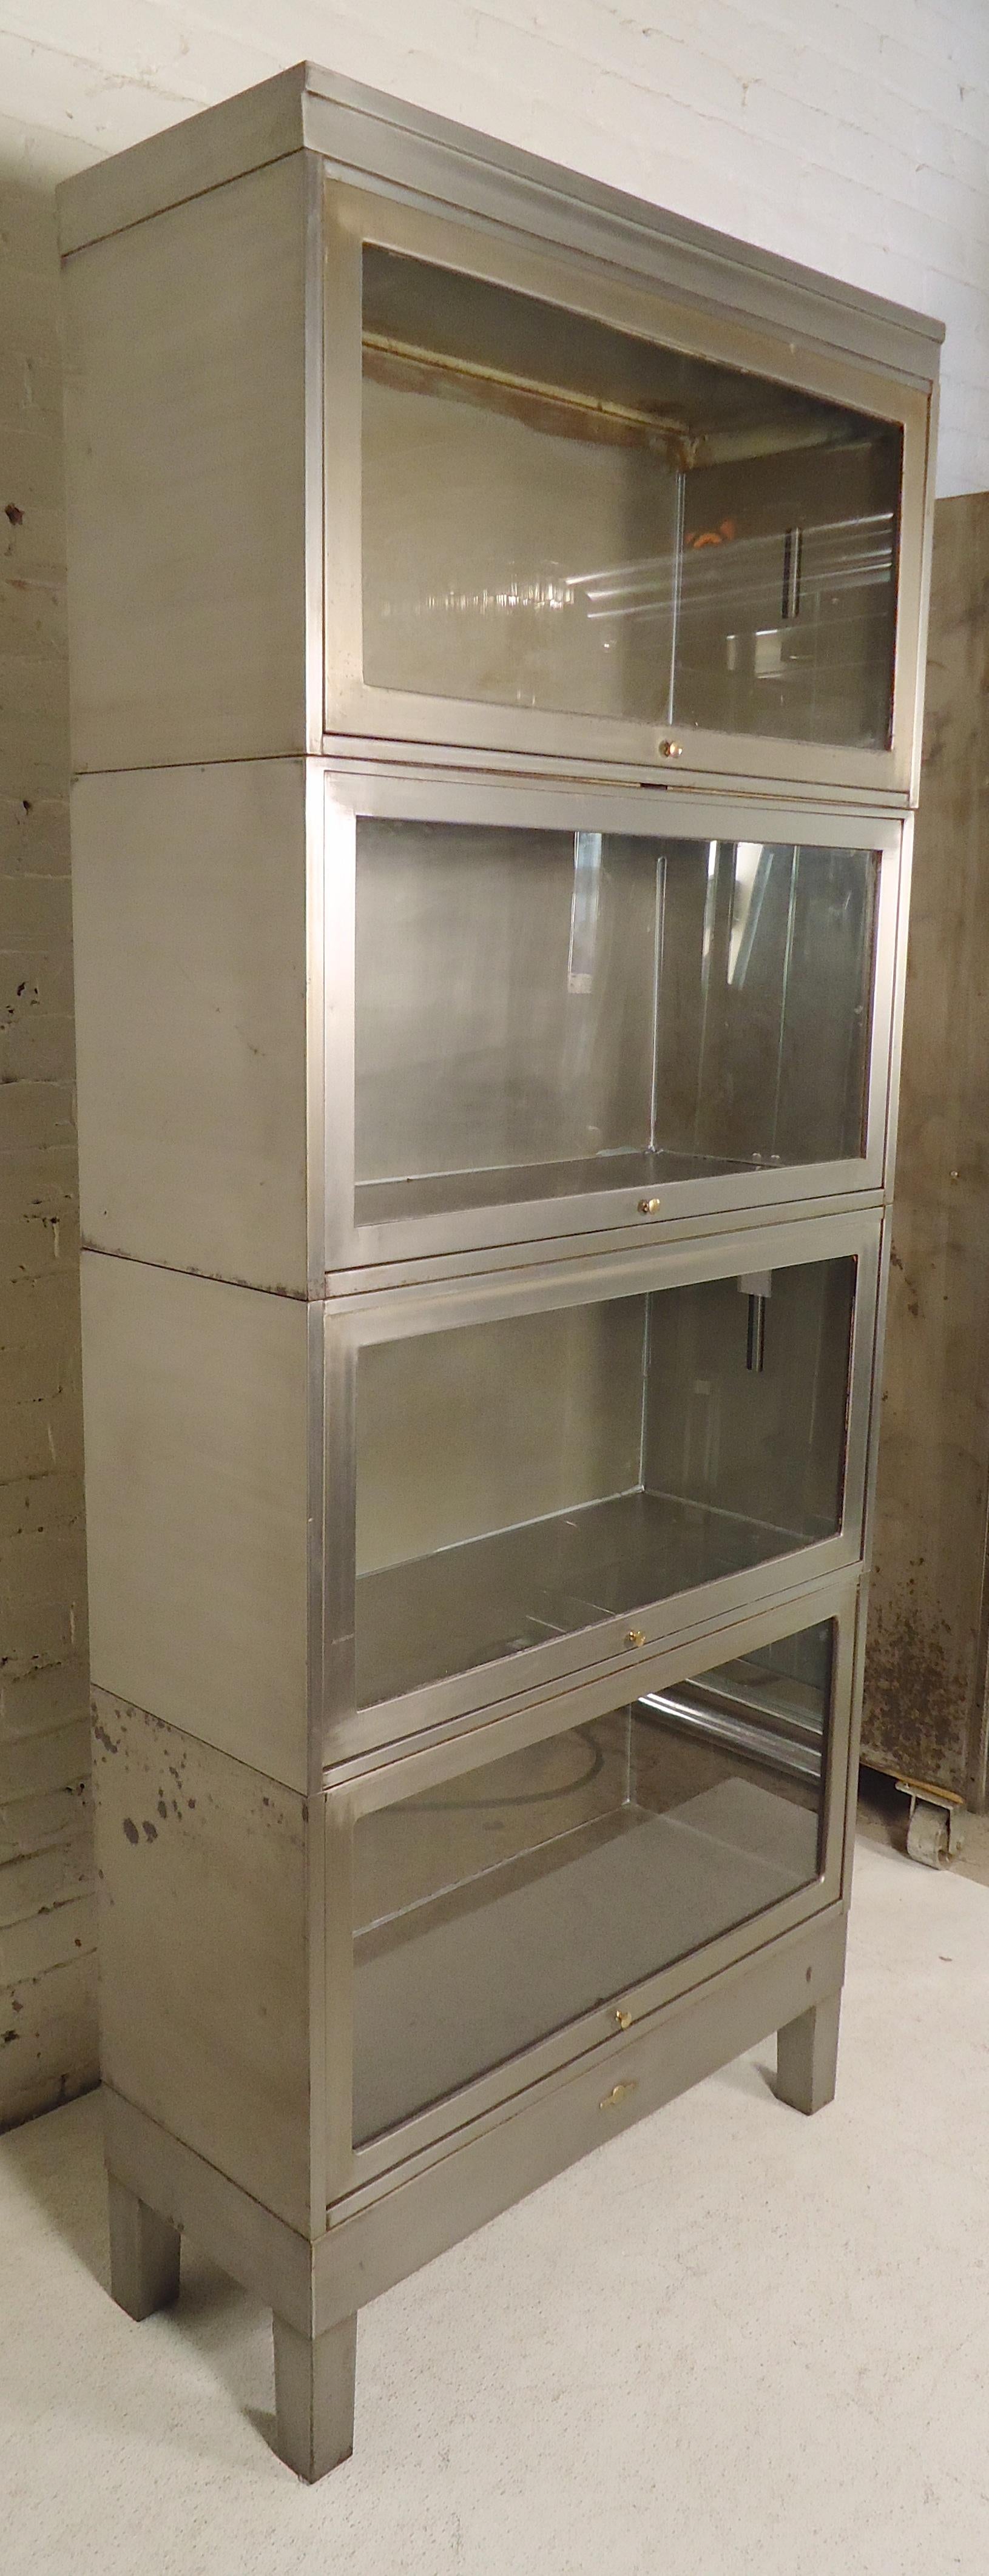 Industrial metal stacking bookcase restored in a bare metal style finish. Glass doors recess into each cabinet and close protecting your books and files.

(Please confirm item location - NY or NJ - with dealer).
 